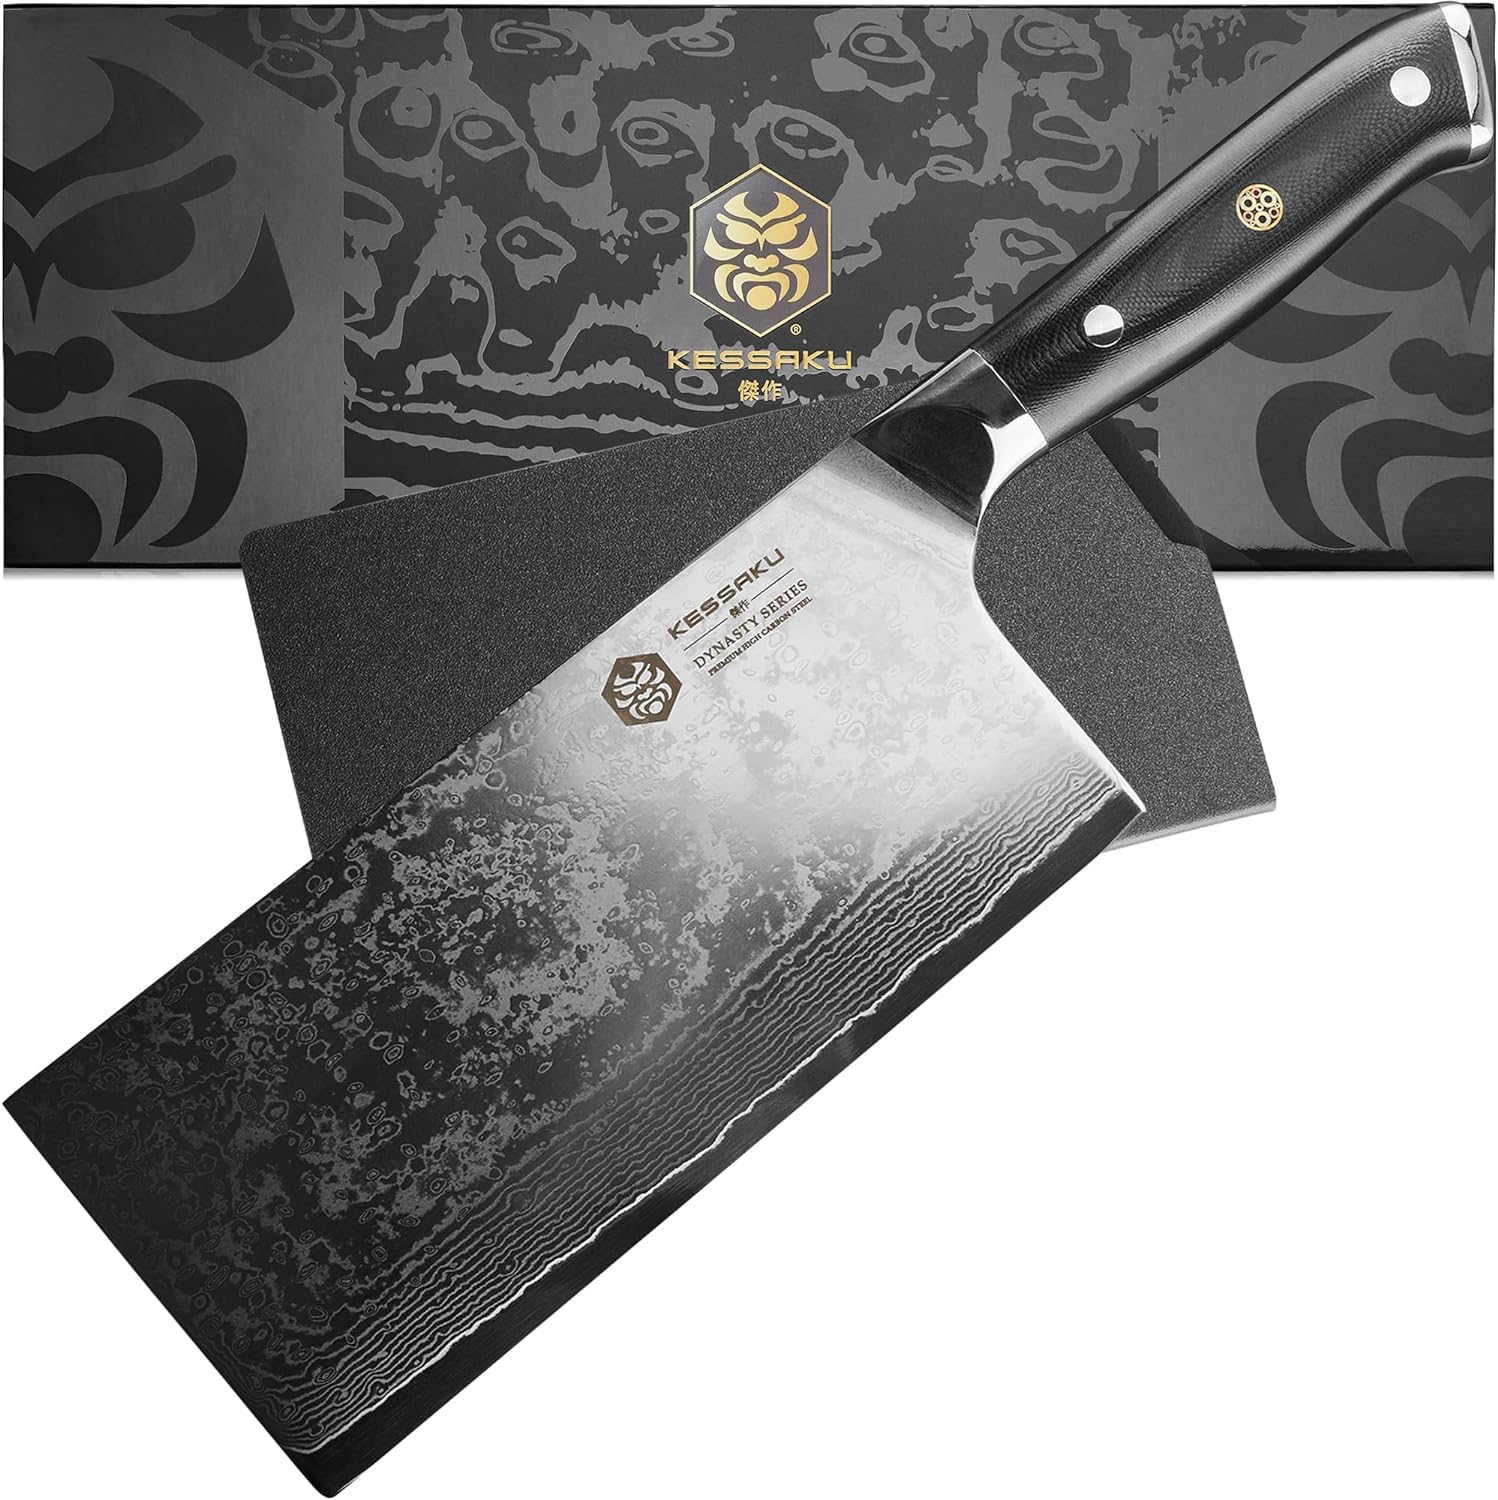 KESSAKU Meat Cleaver Butcher Knife - 7 inch - Damascus Dynasty Series - Heavy Duty - Razor Sharp - Forged 67-Layer Japanese AUS-10V High Carbon Stainless Steel - G10 Garolite Handle with Blade Guard